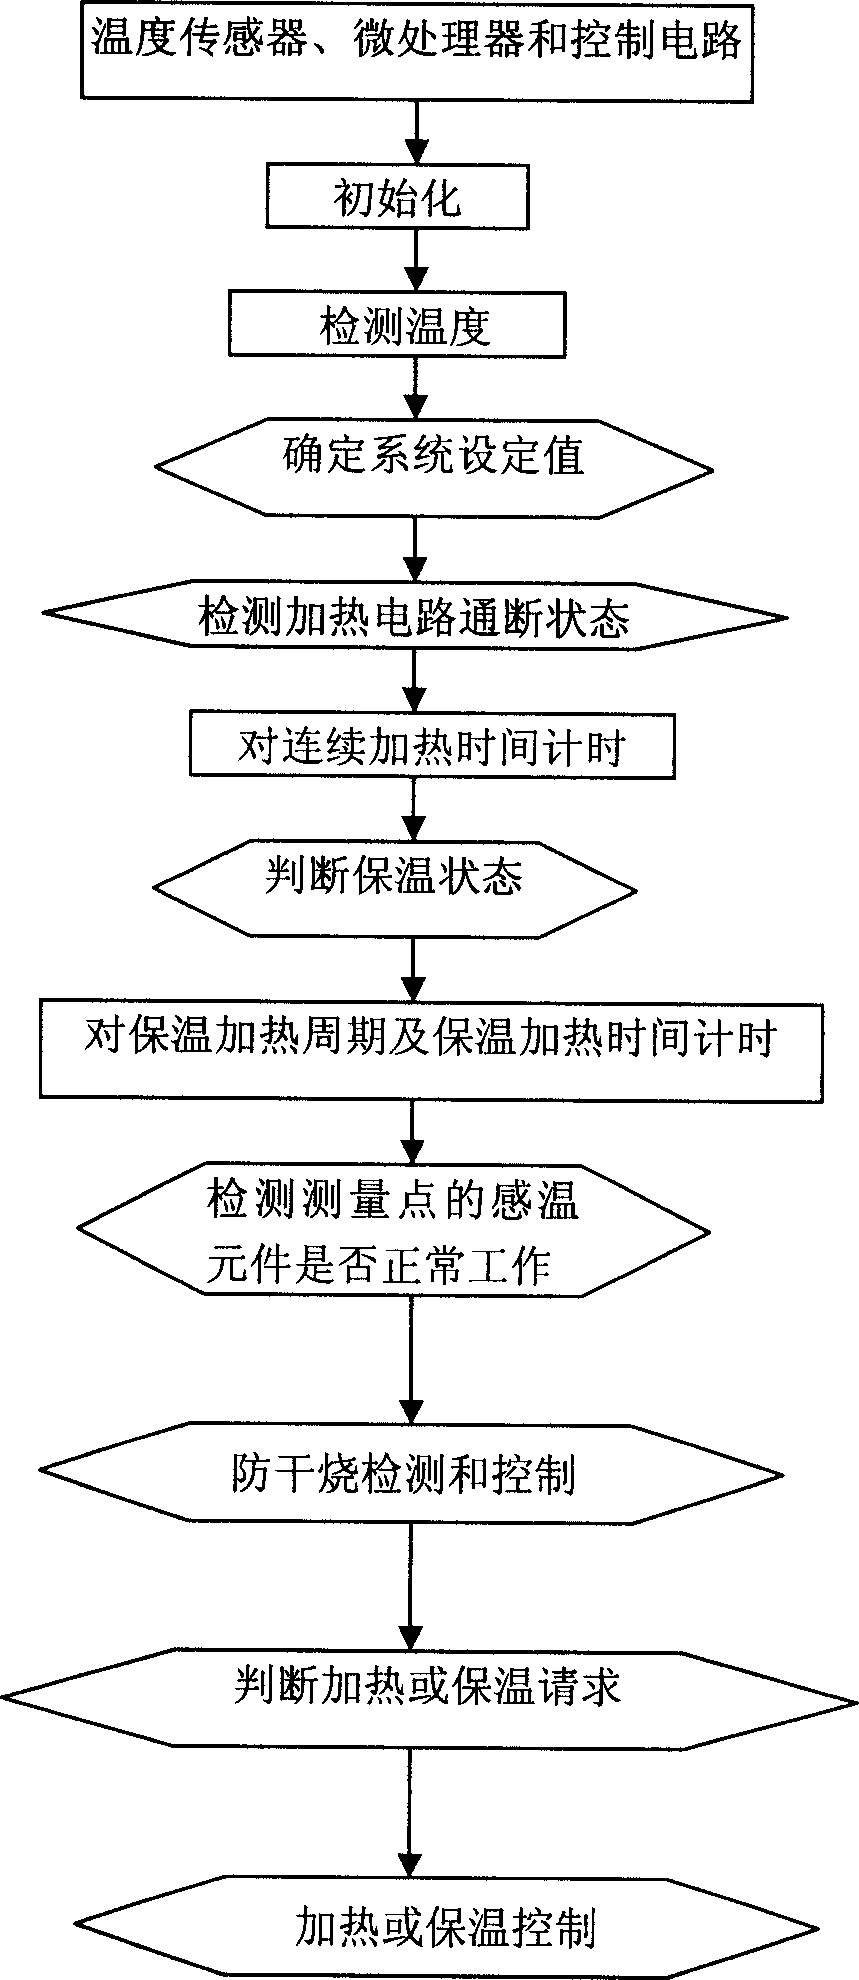 Control method for electric heating kettle